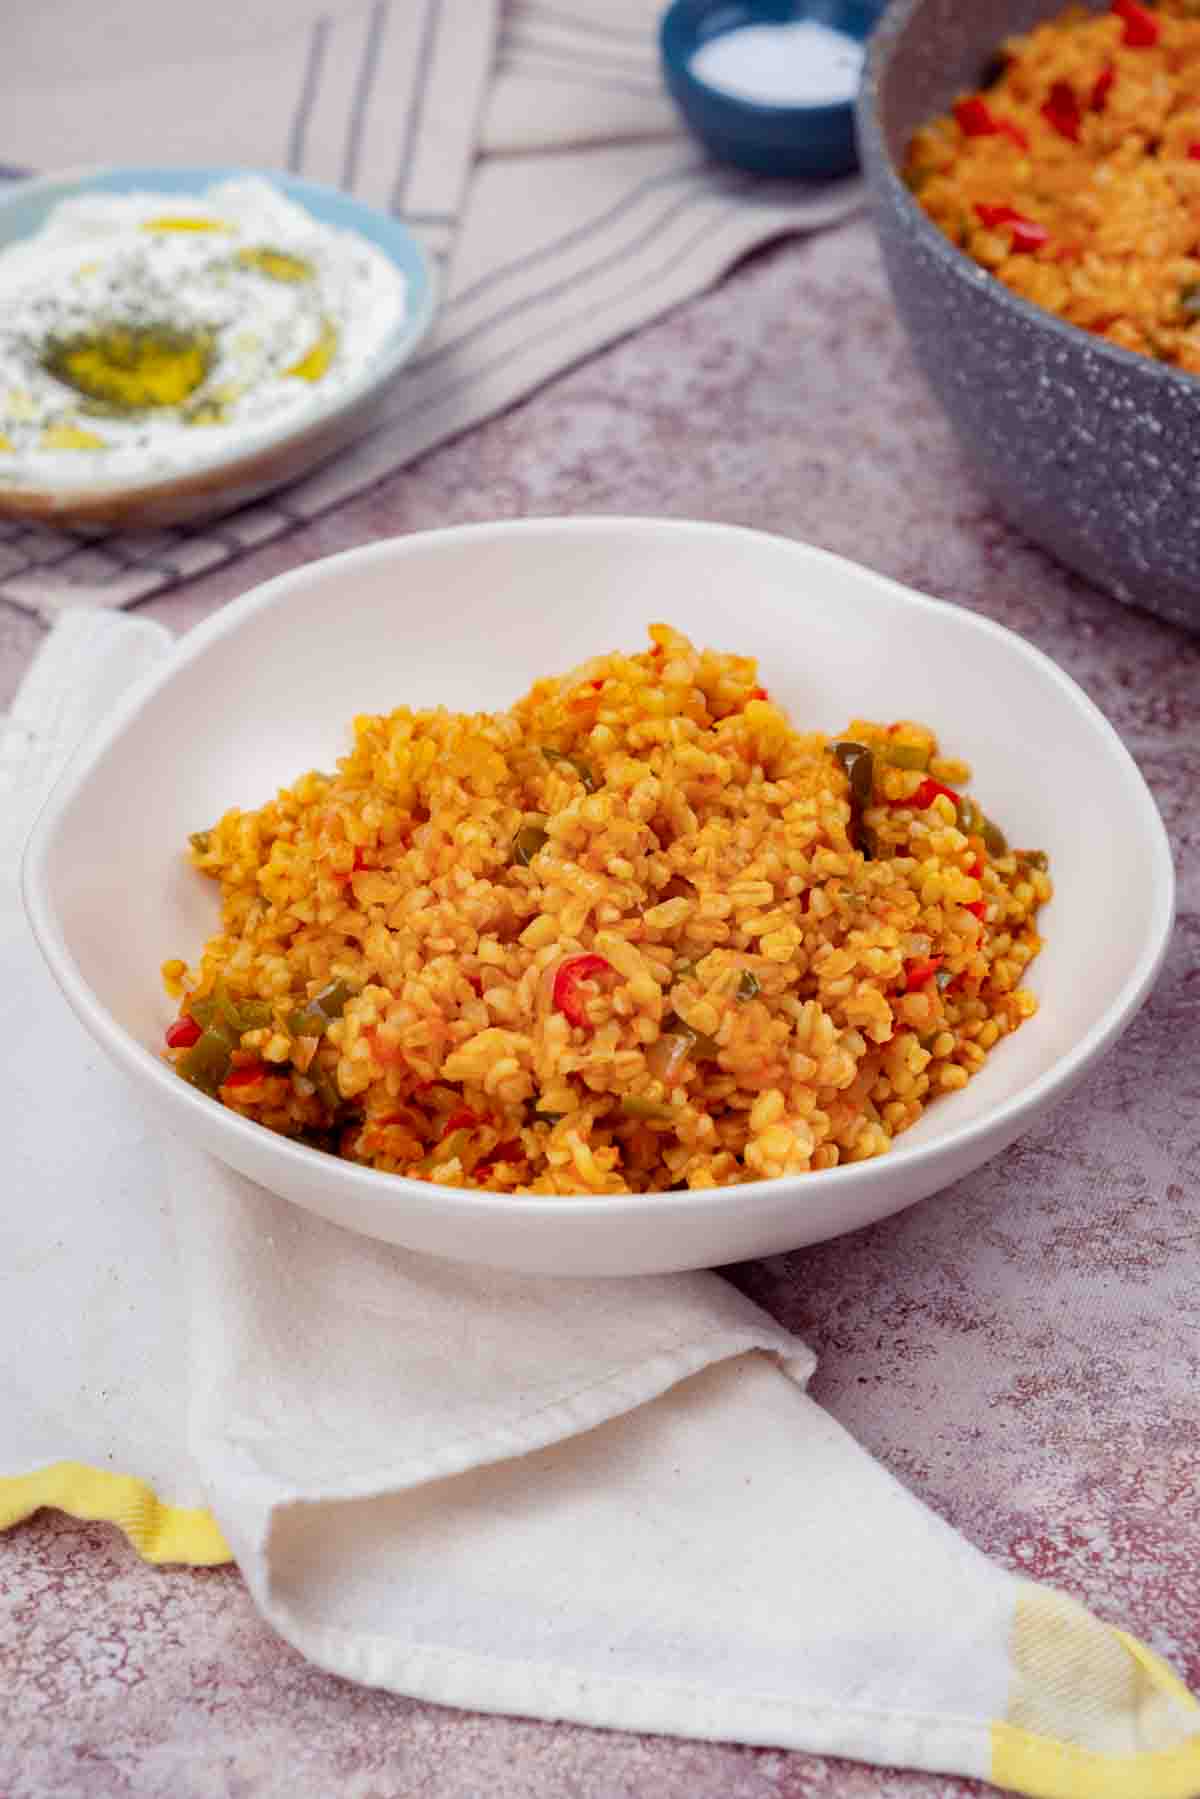 A table setting with a bowl of bulgur cooked with tomatoes and spices.